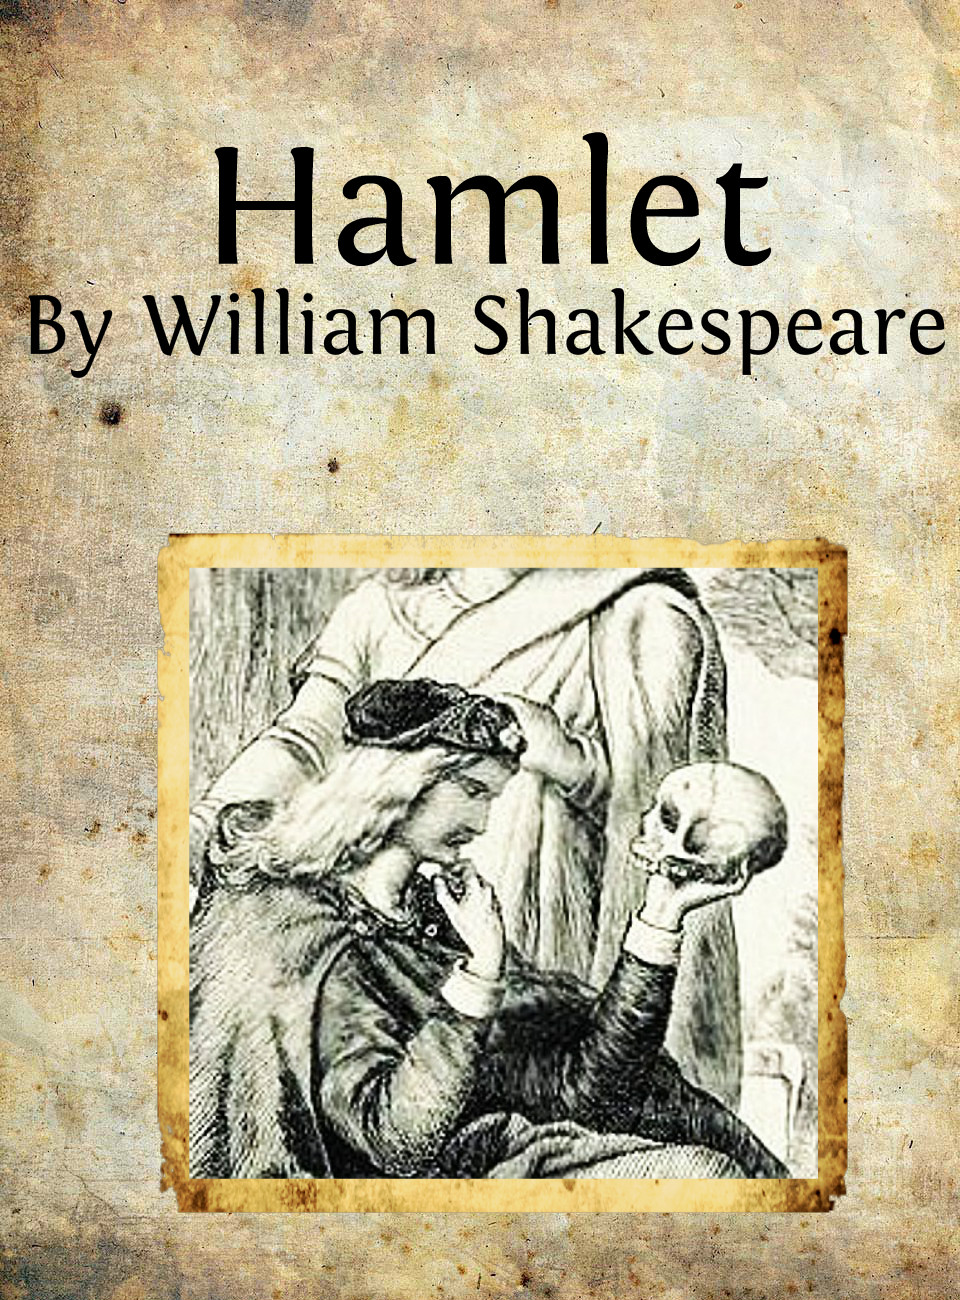 The Question Of Hamlet